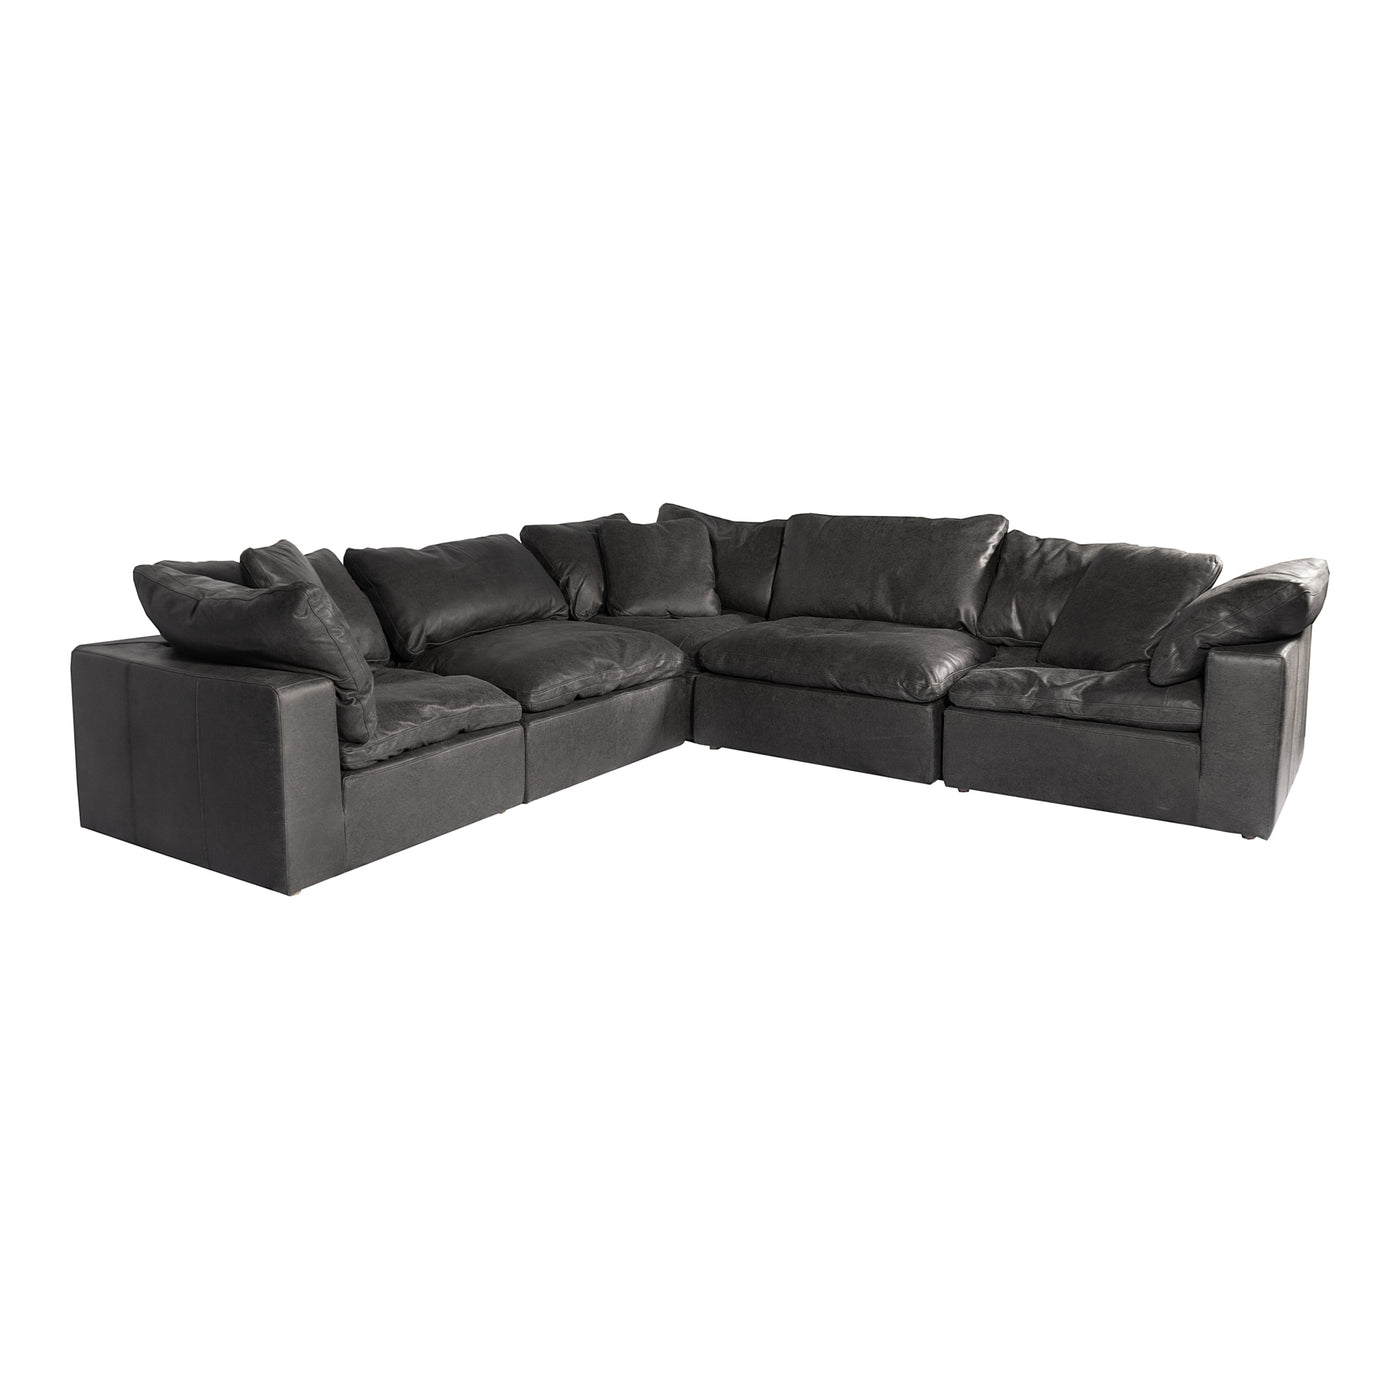 Our Clay Classic L Modular Sectional is upholstered with a soft, smooth, top-grain nubuck leather. Its cushions are filled...